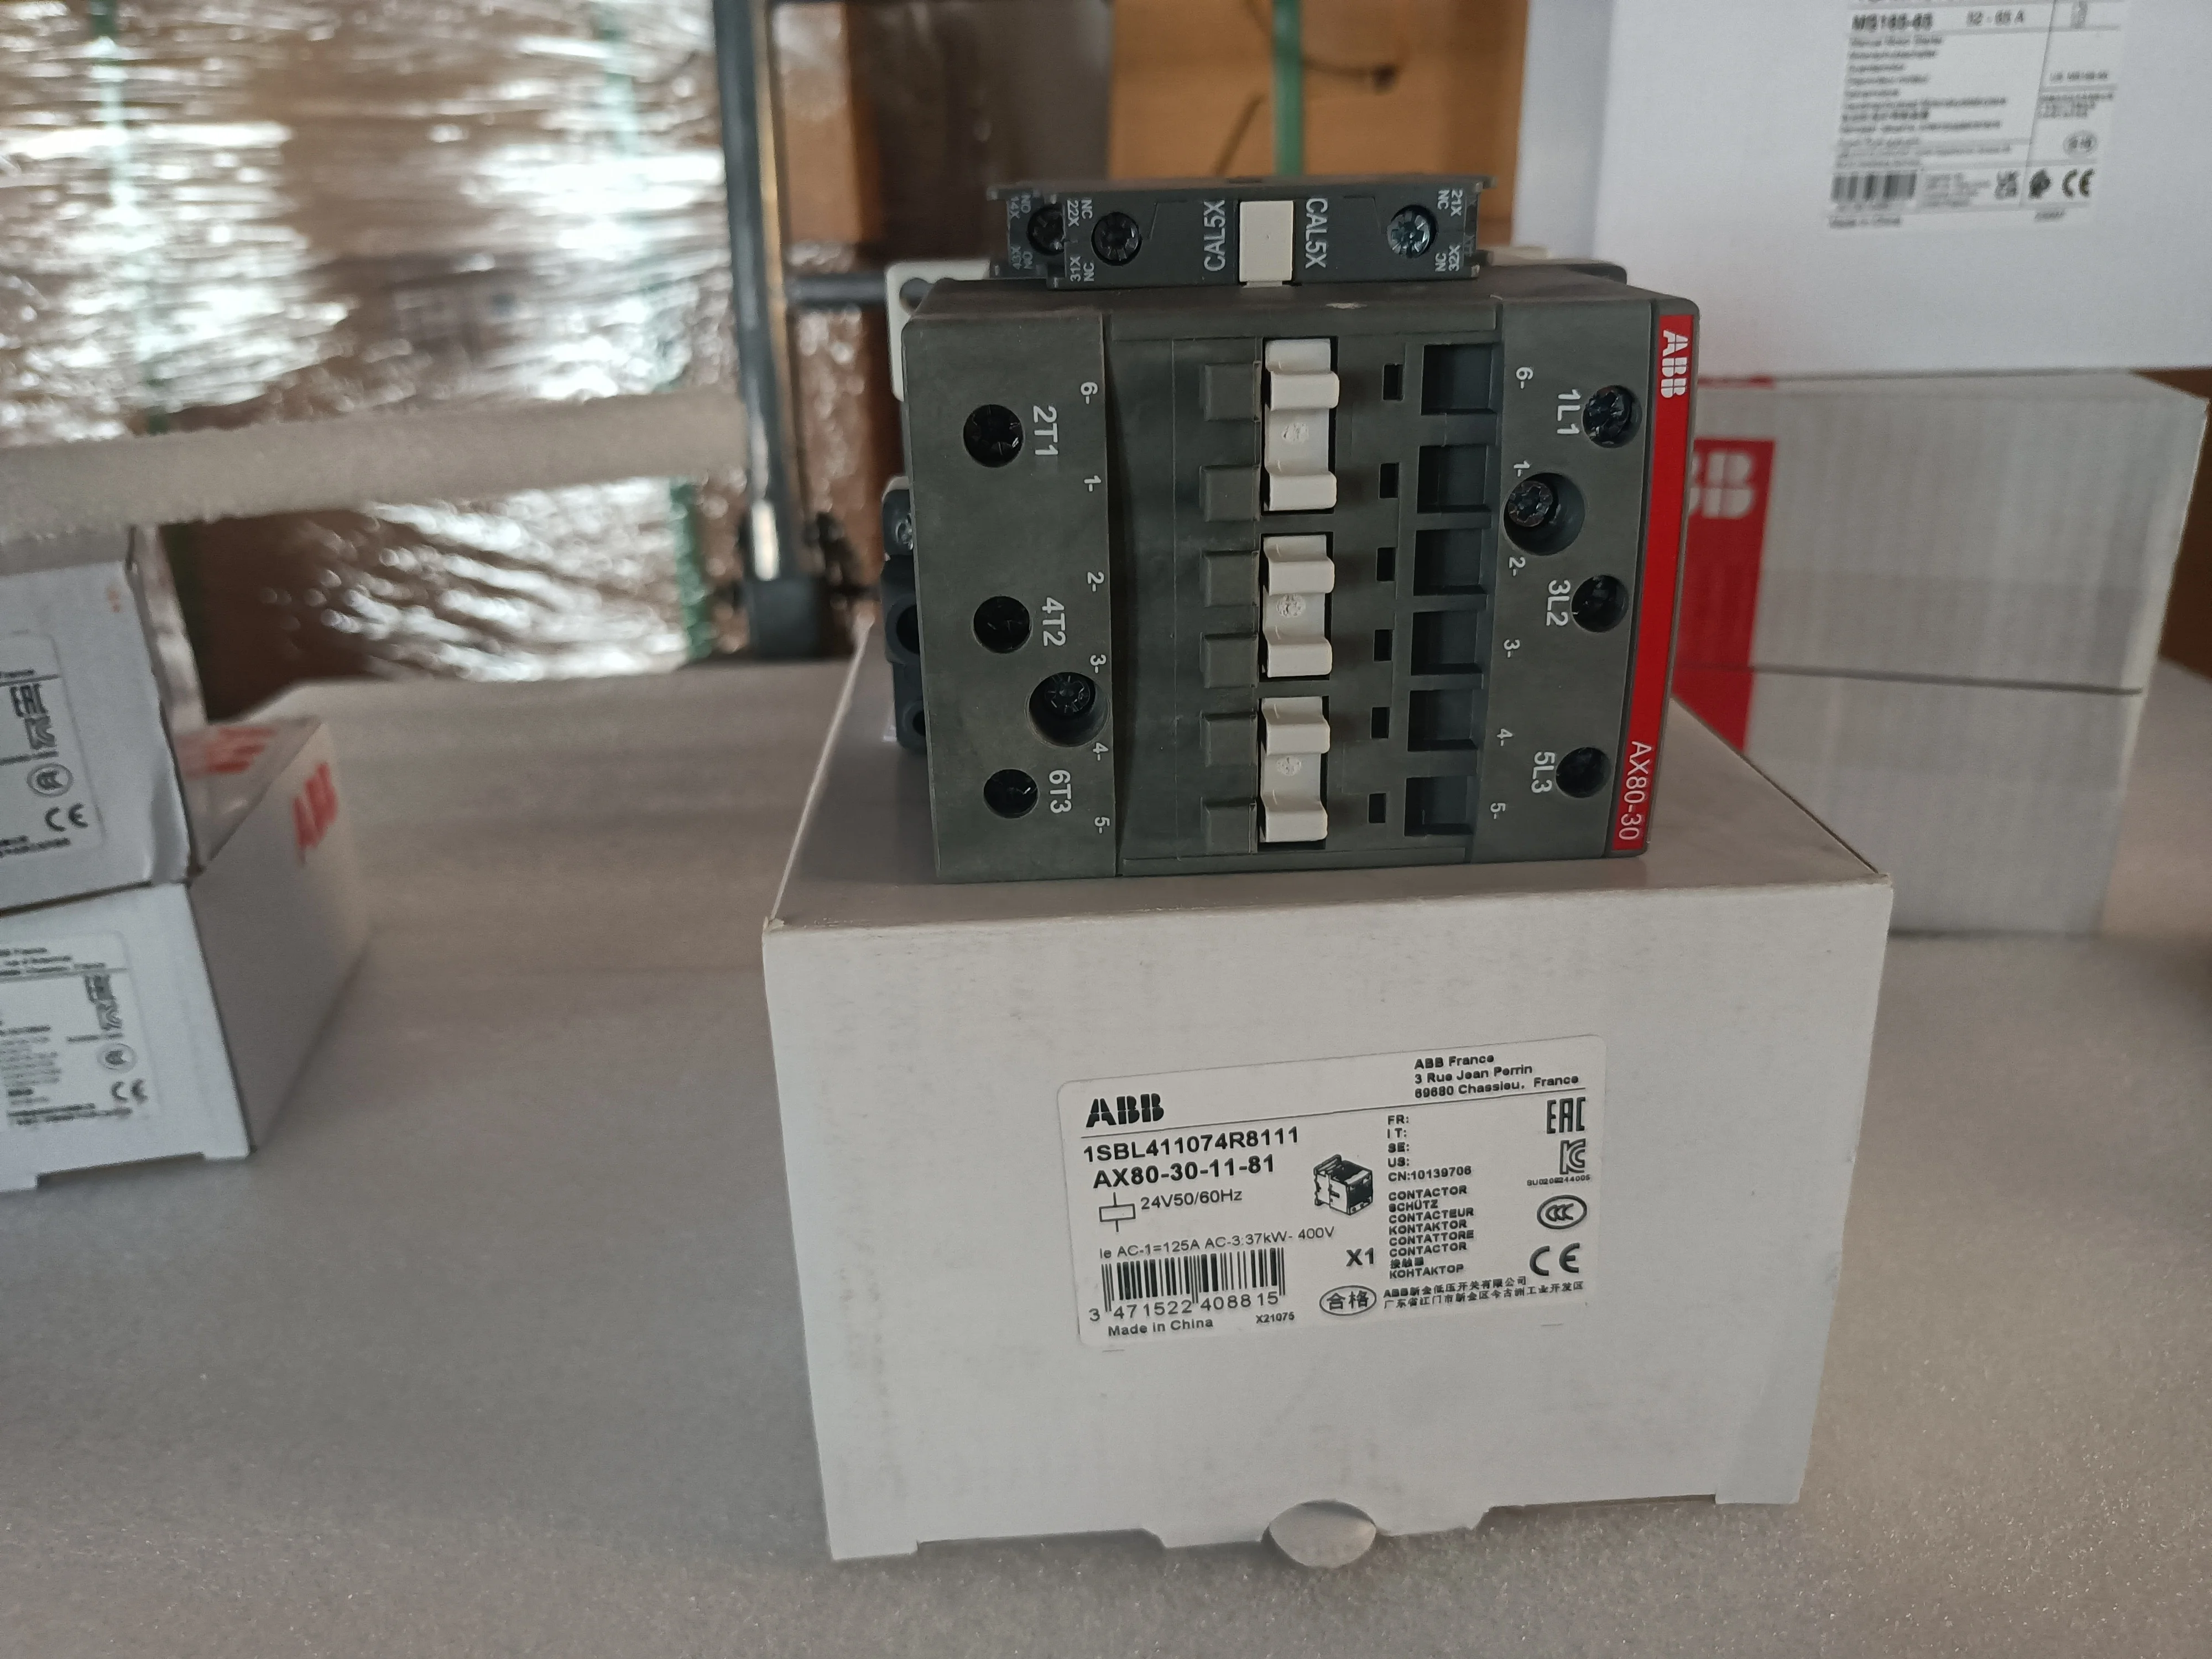 Cheap and Large Stock New ABB Contactor AX40 Series AC Contactors  AX40-30-10-81 1SBL321074R8110 Electric Contactor